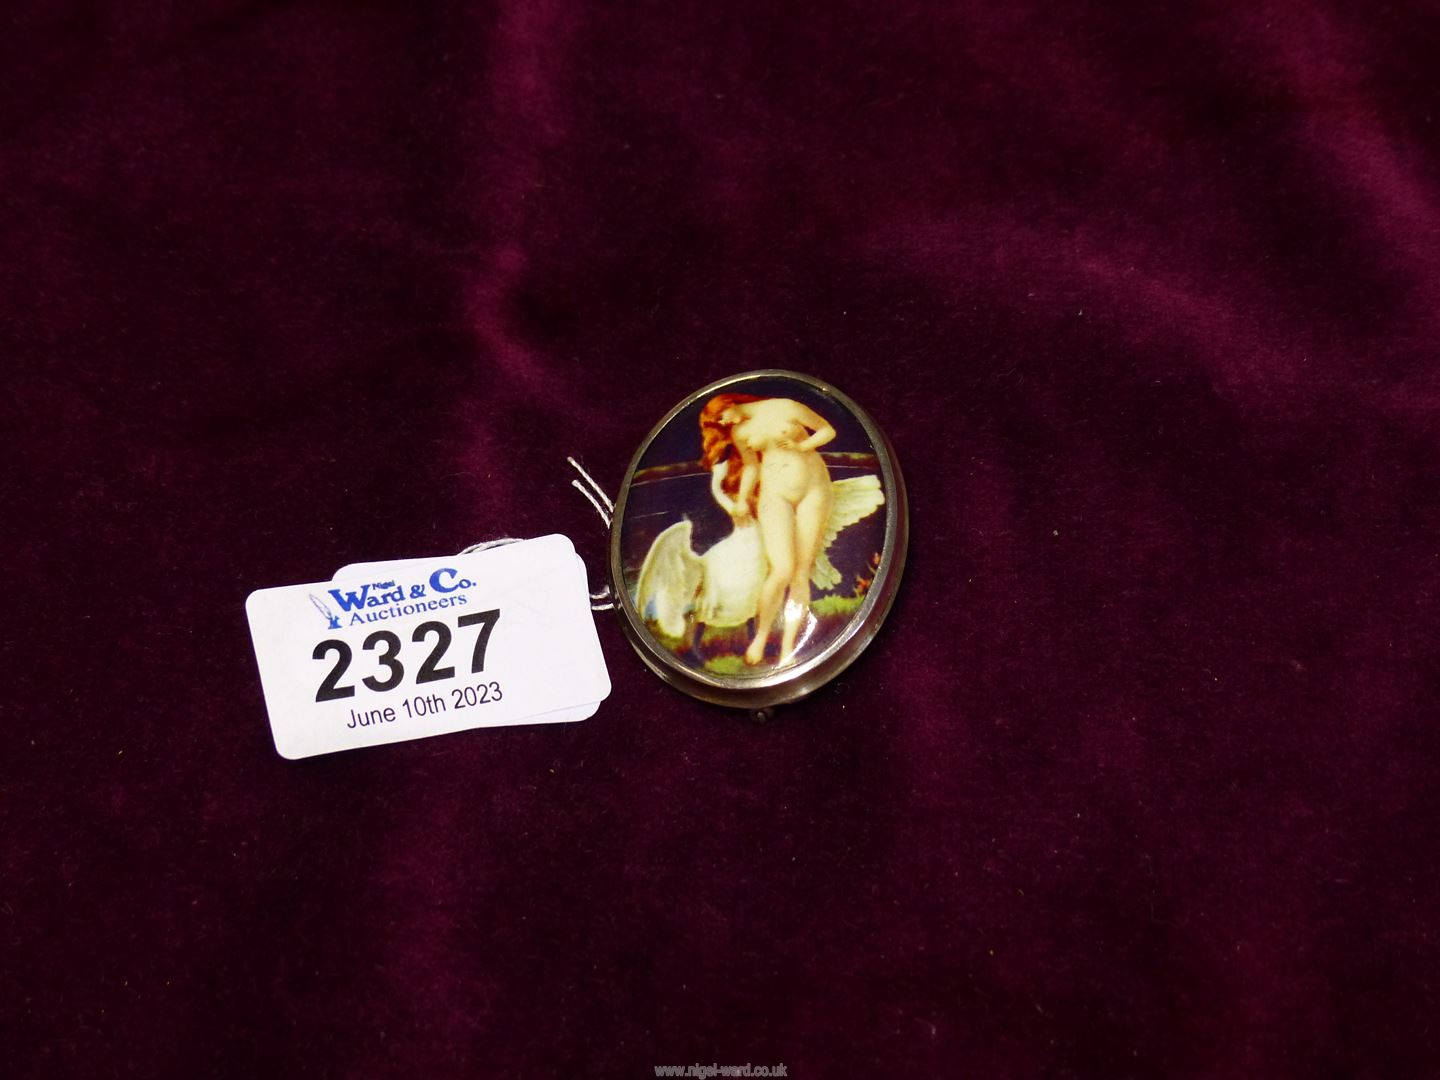 A brooch with miniature print of female nude on plastic and sterling silver mount.